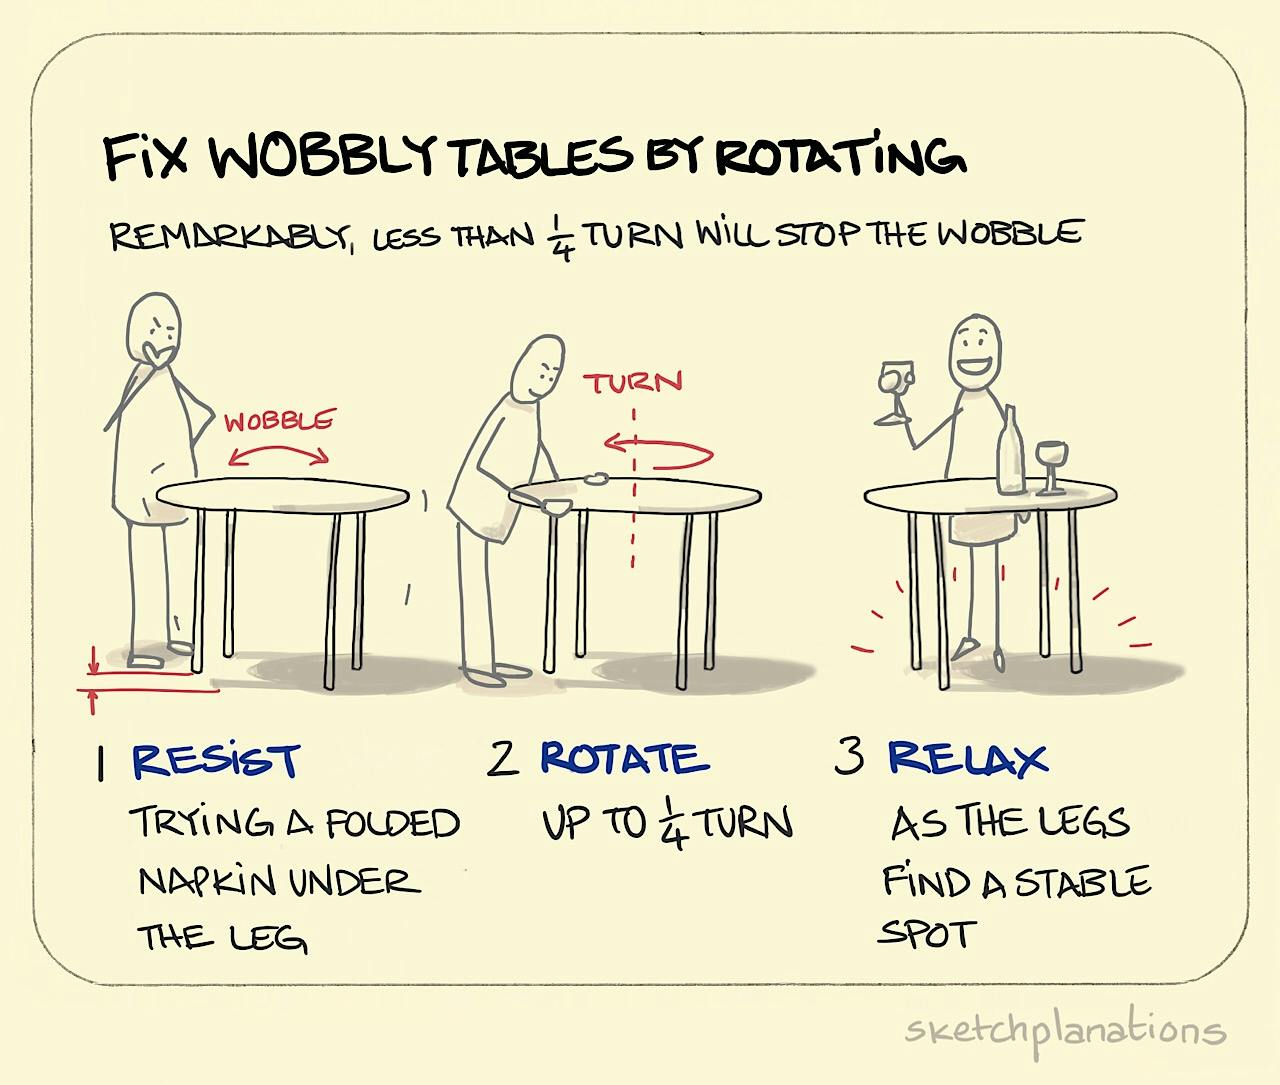 Tightly answer cough Fix wobbly tables by rotating - Sketchplanations